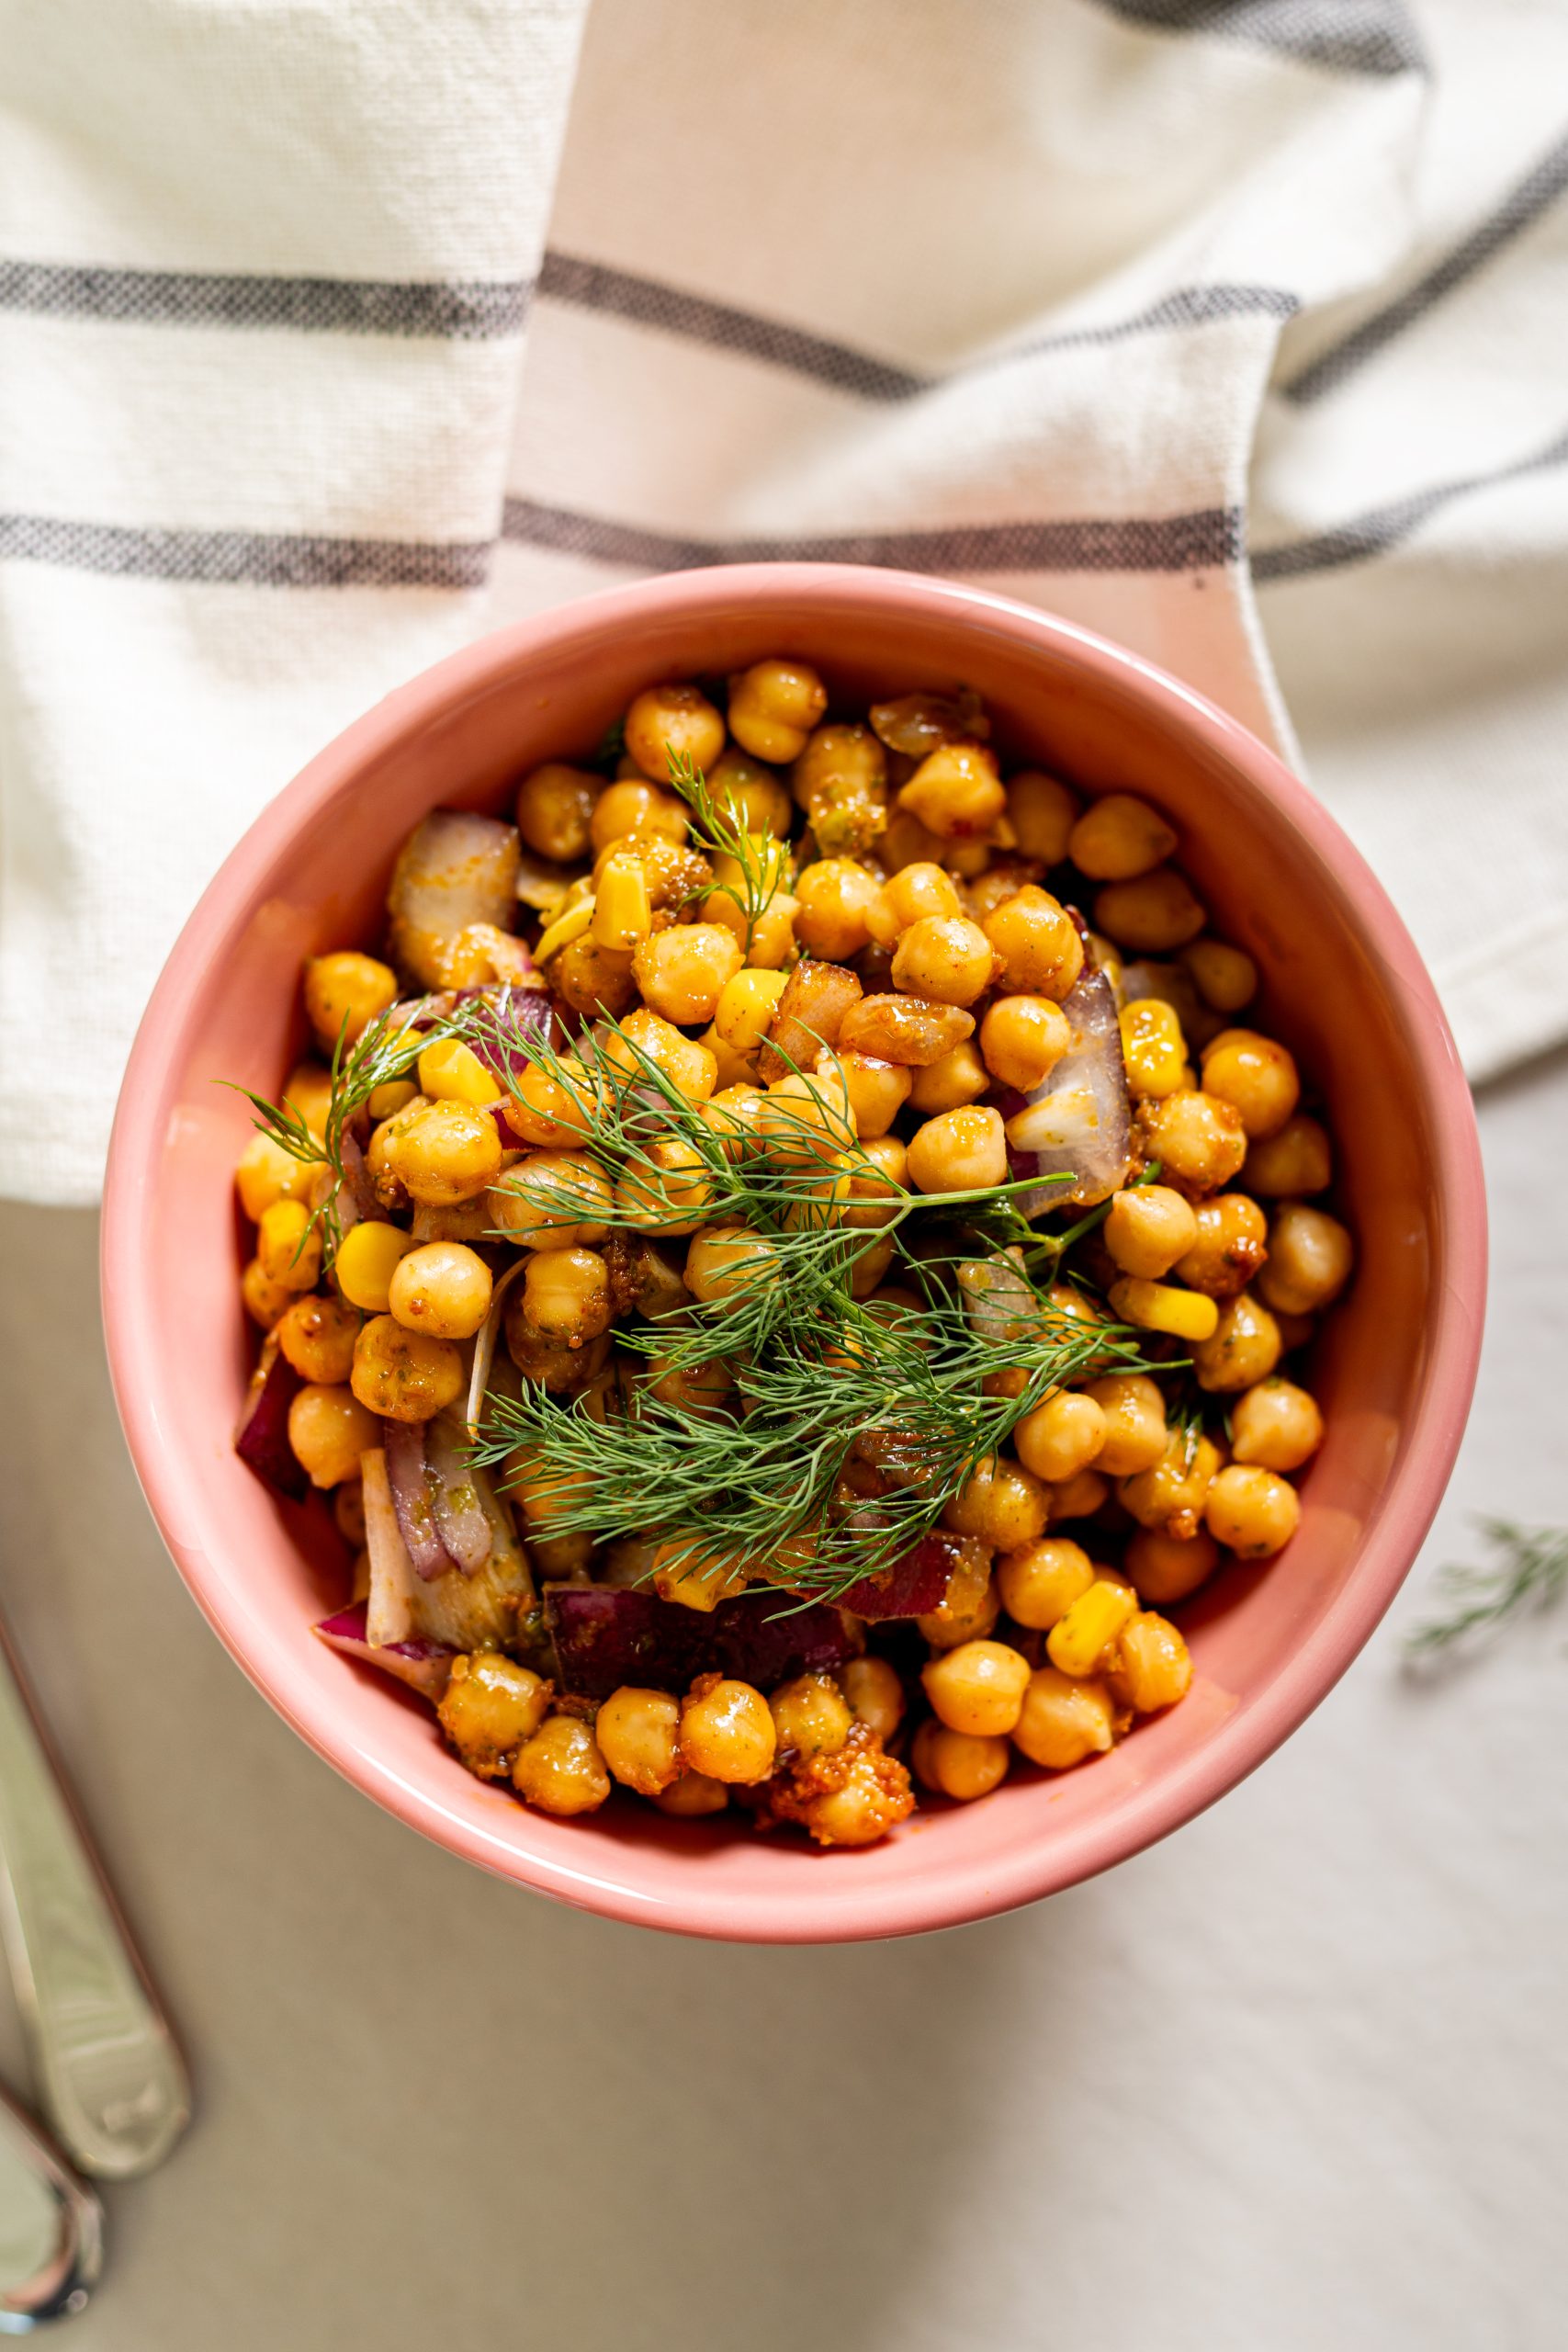 Chickpea salad with spicy pesto